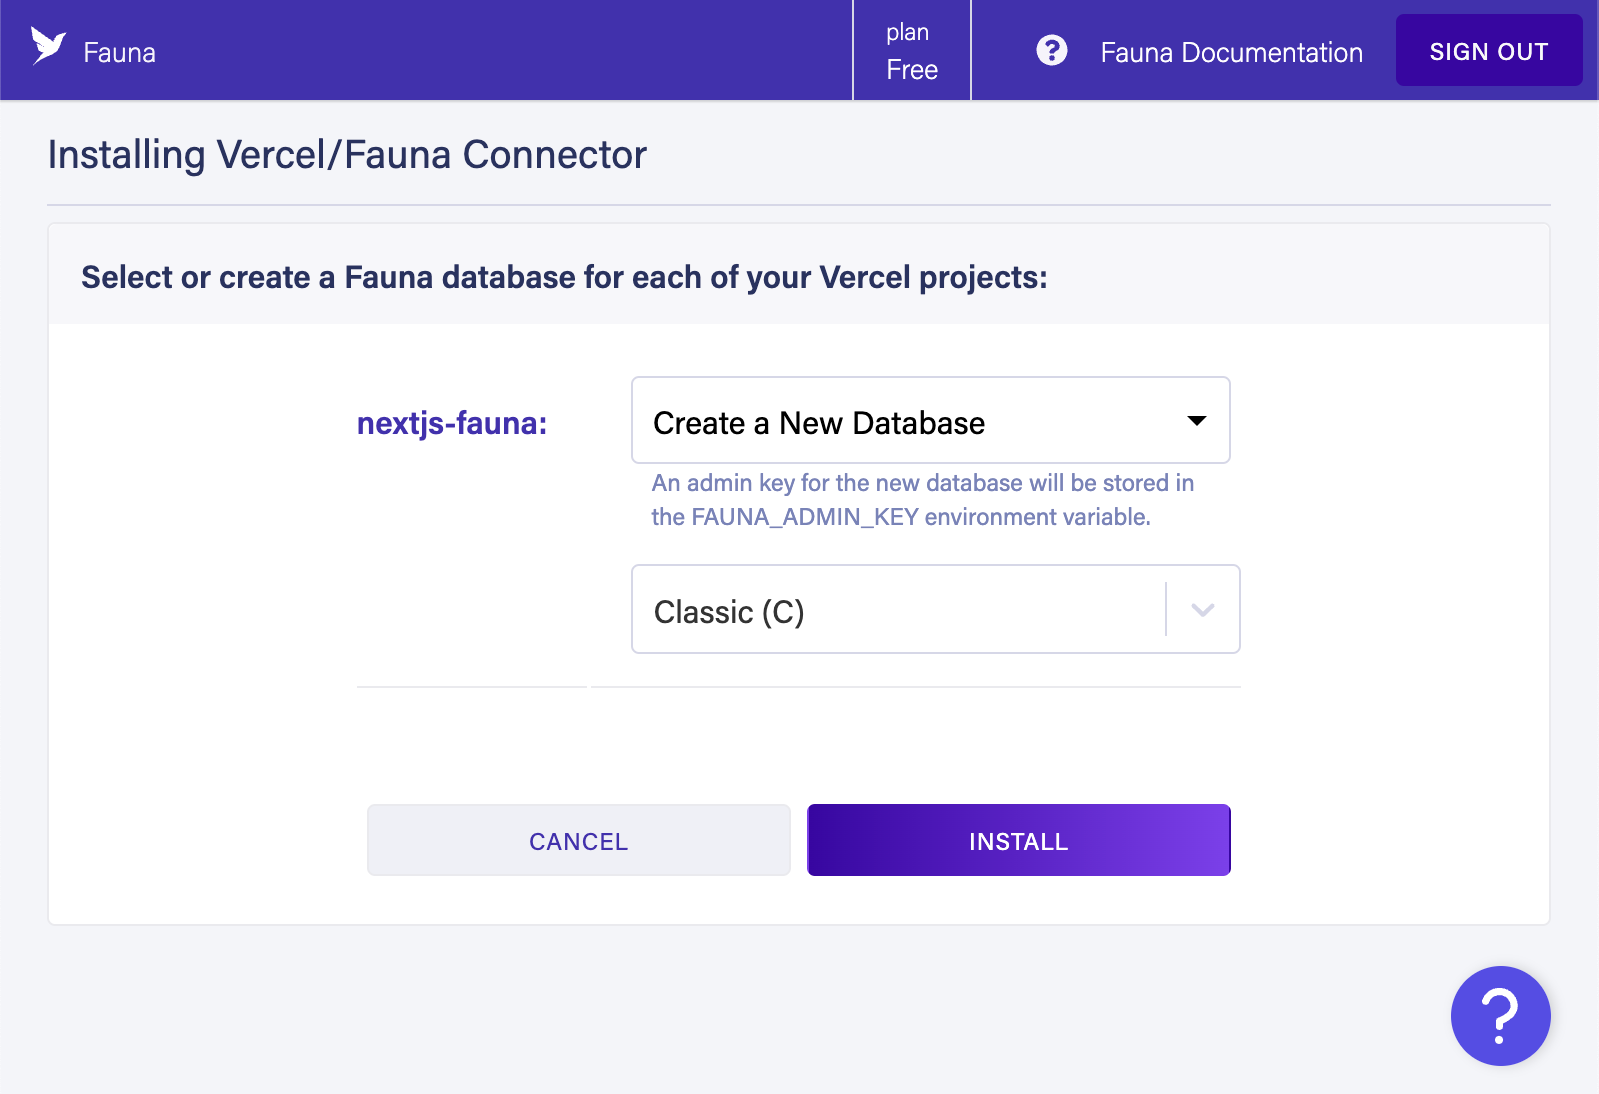 The Install Vercel/Fauna Connector screen